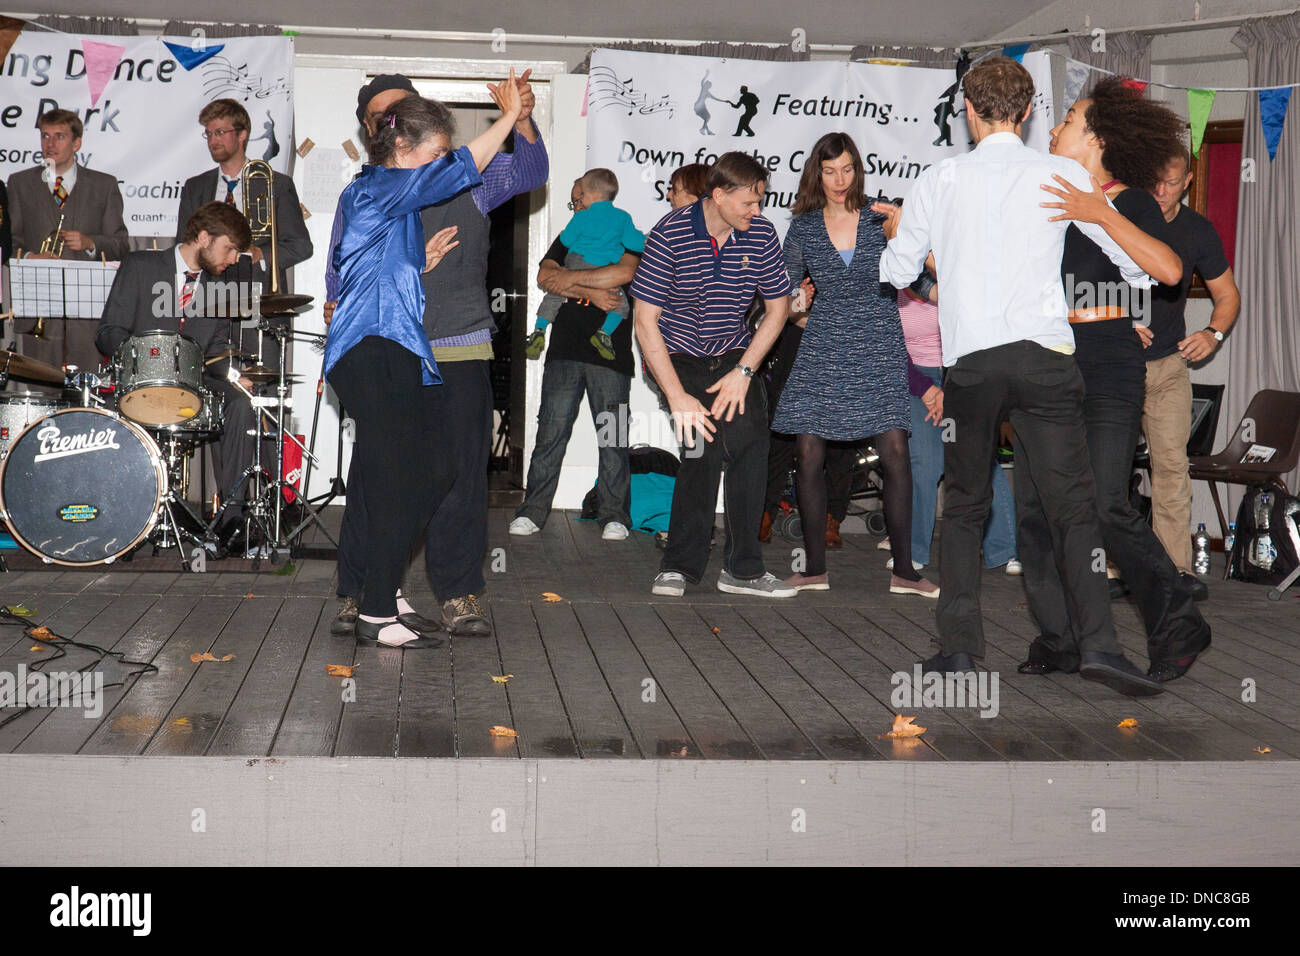 Thames Festival South Bank Themse 2013 Stockfoto